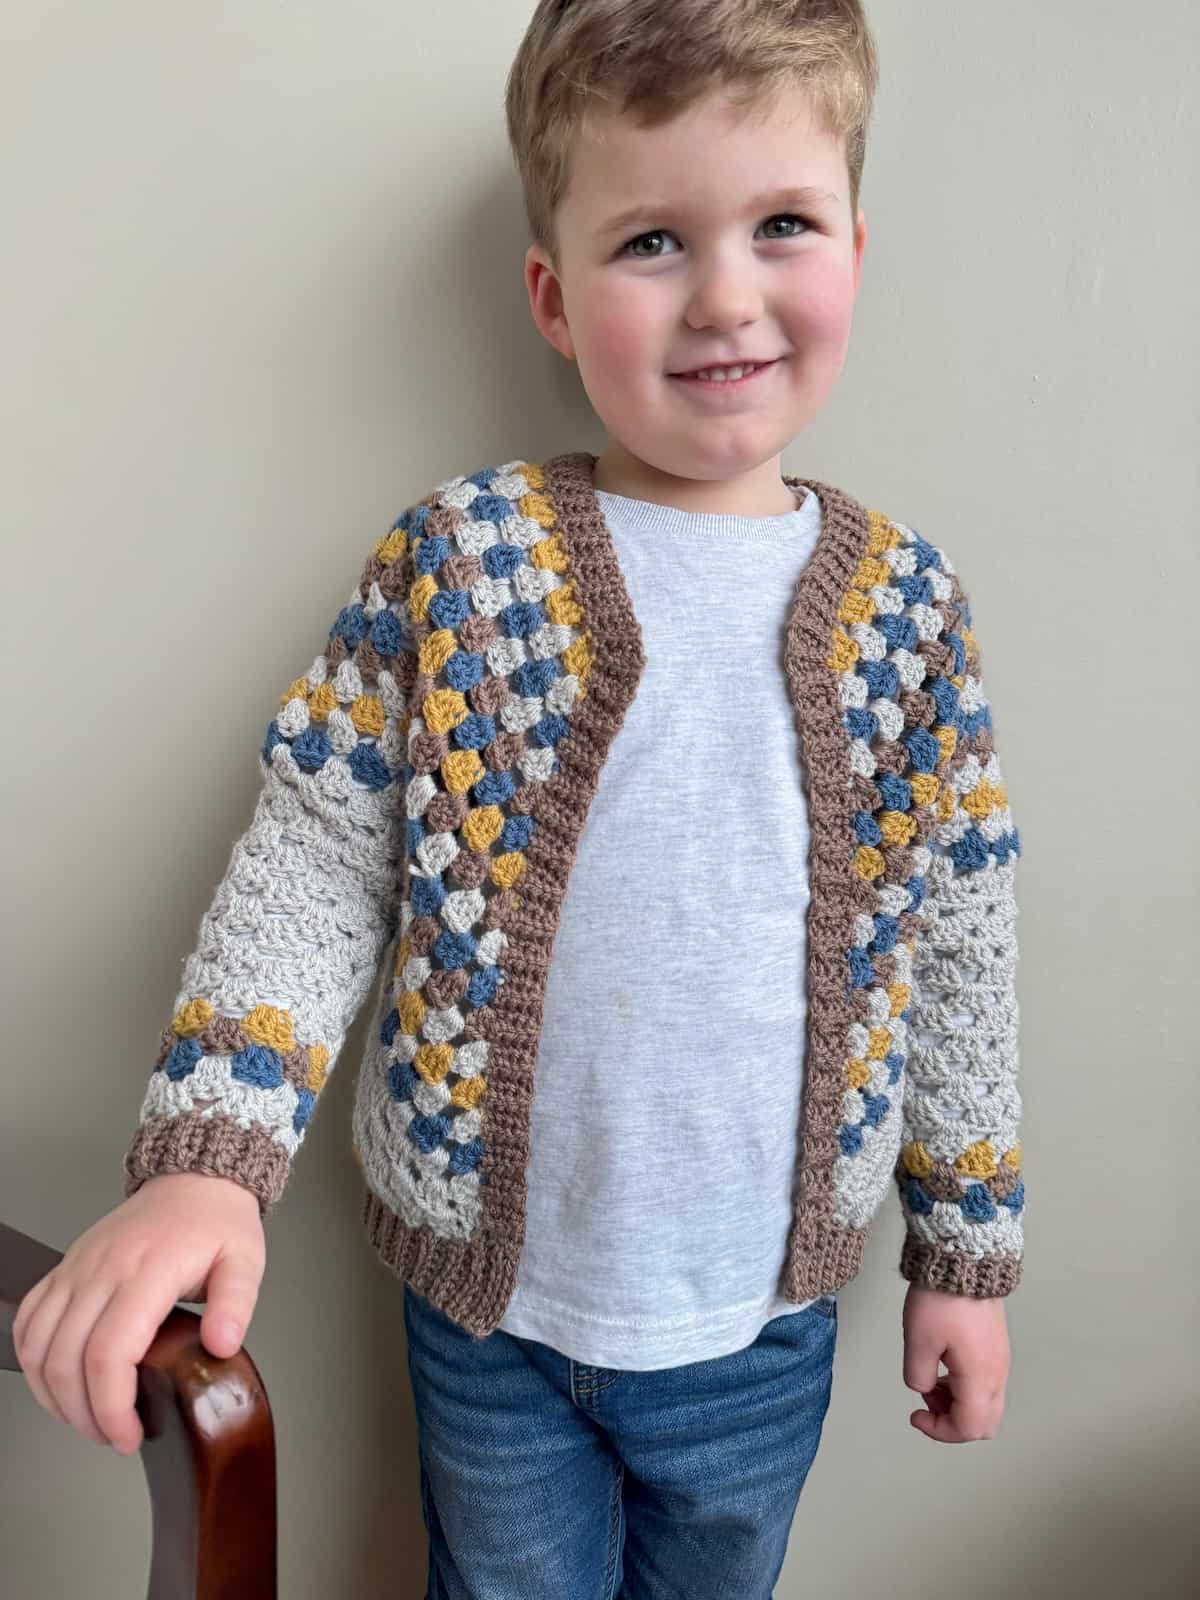 A young kid in a crochet cardigan.